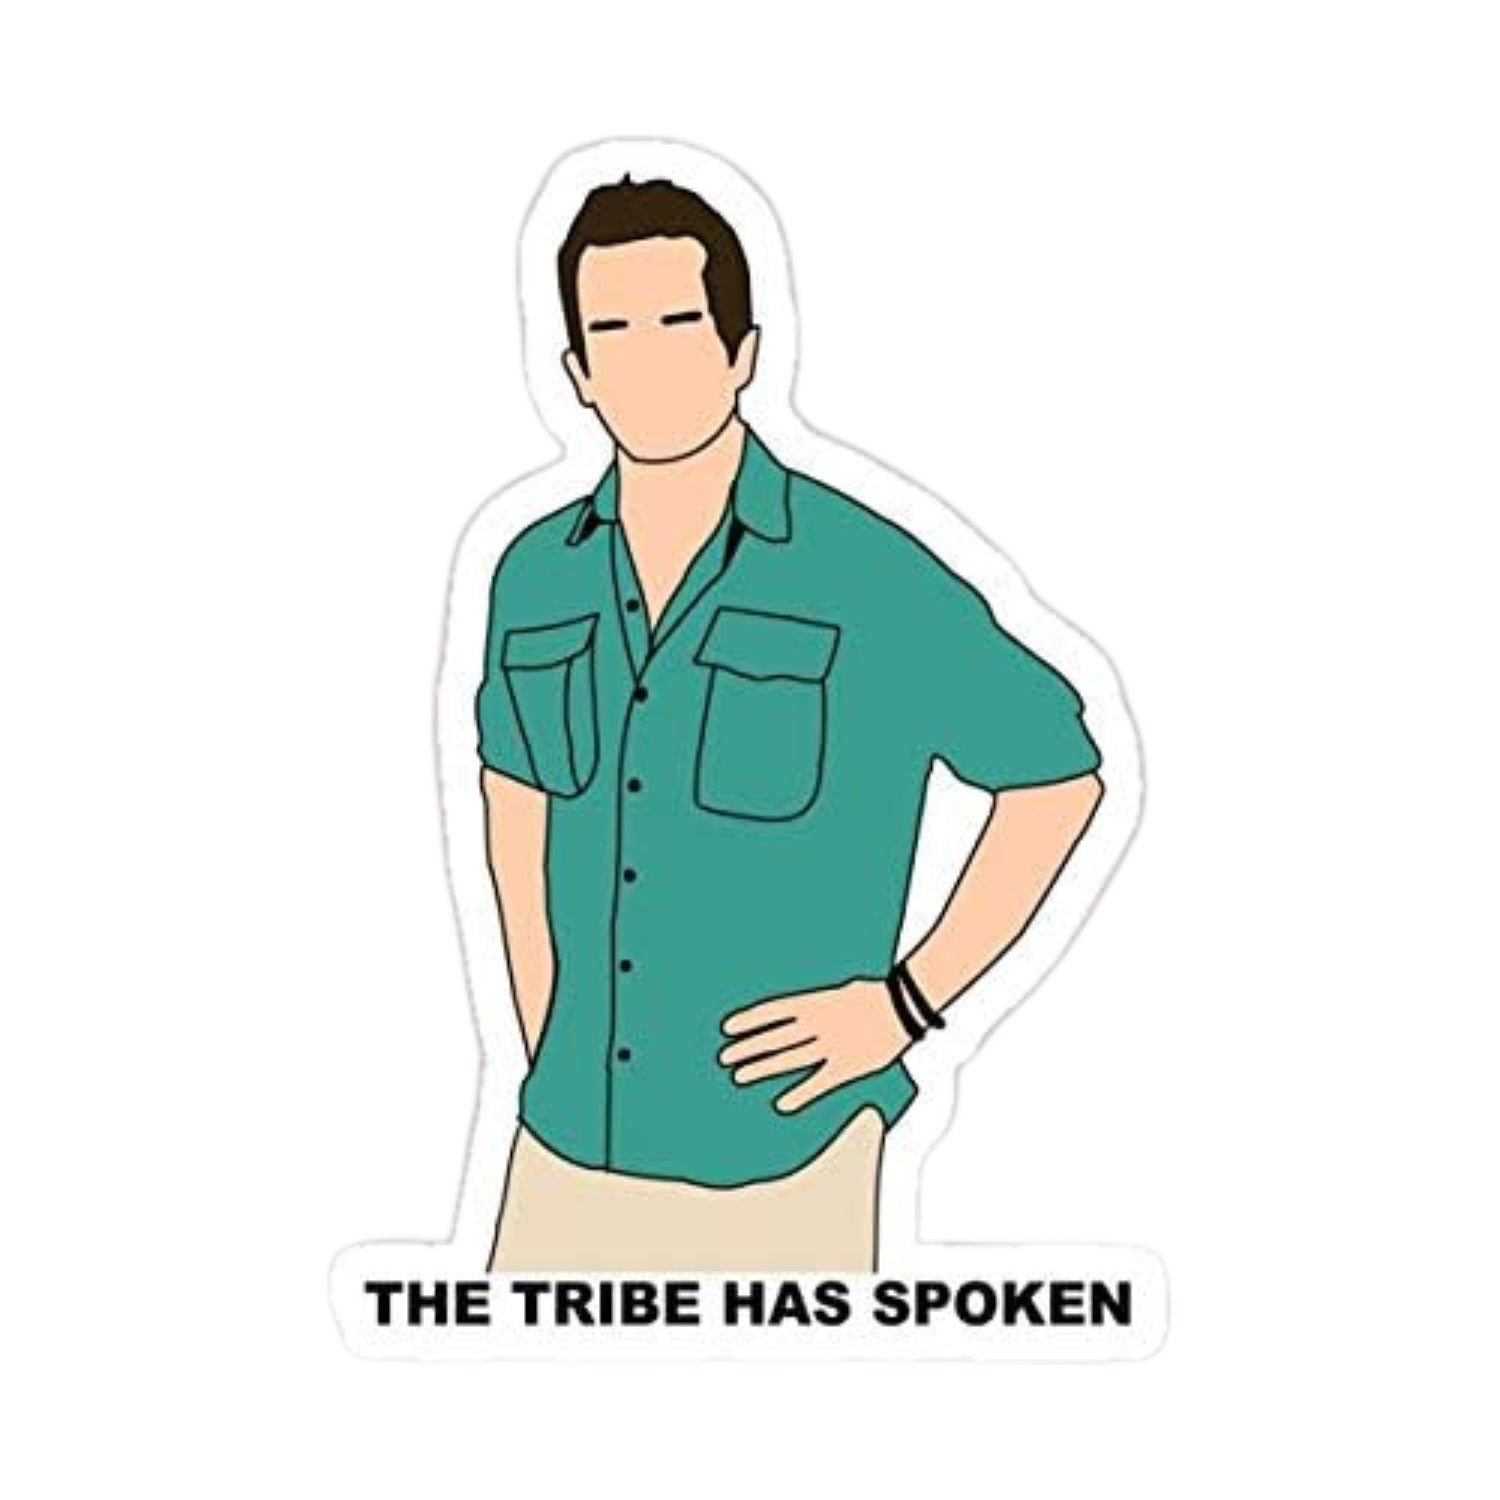 This image shows a sticker of Jeff Probst from 'Survivor' with the phrase 